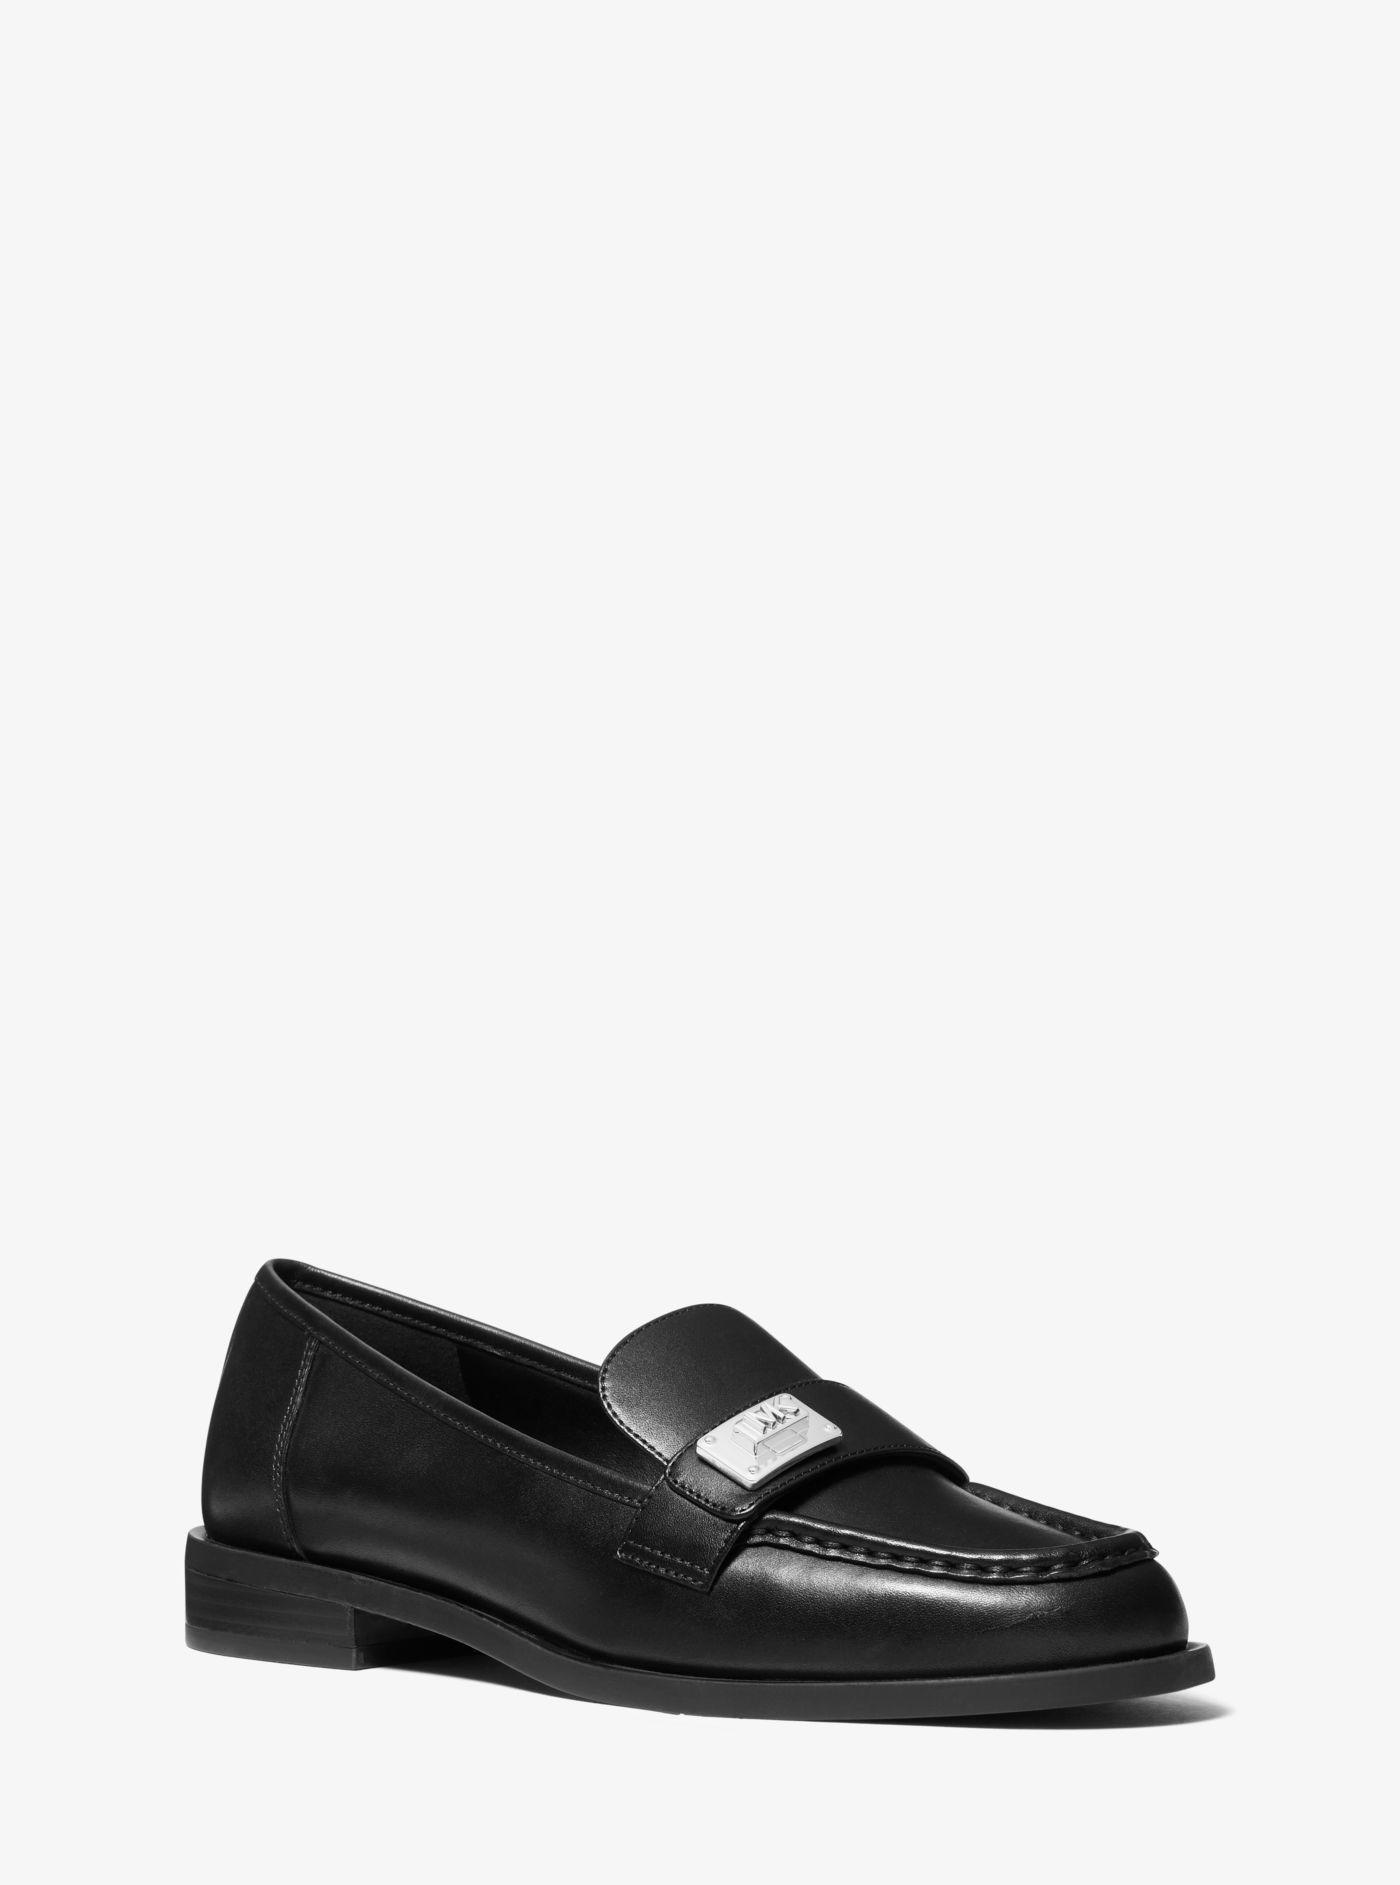 Michael Kors Padma Leather Loafer in Black | Lyst